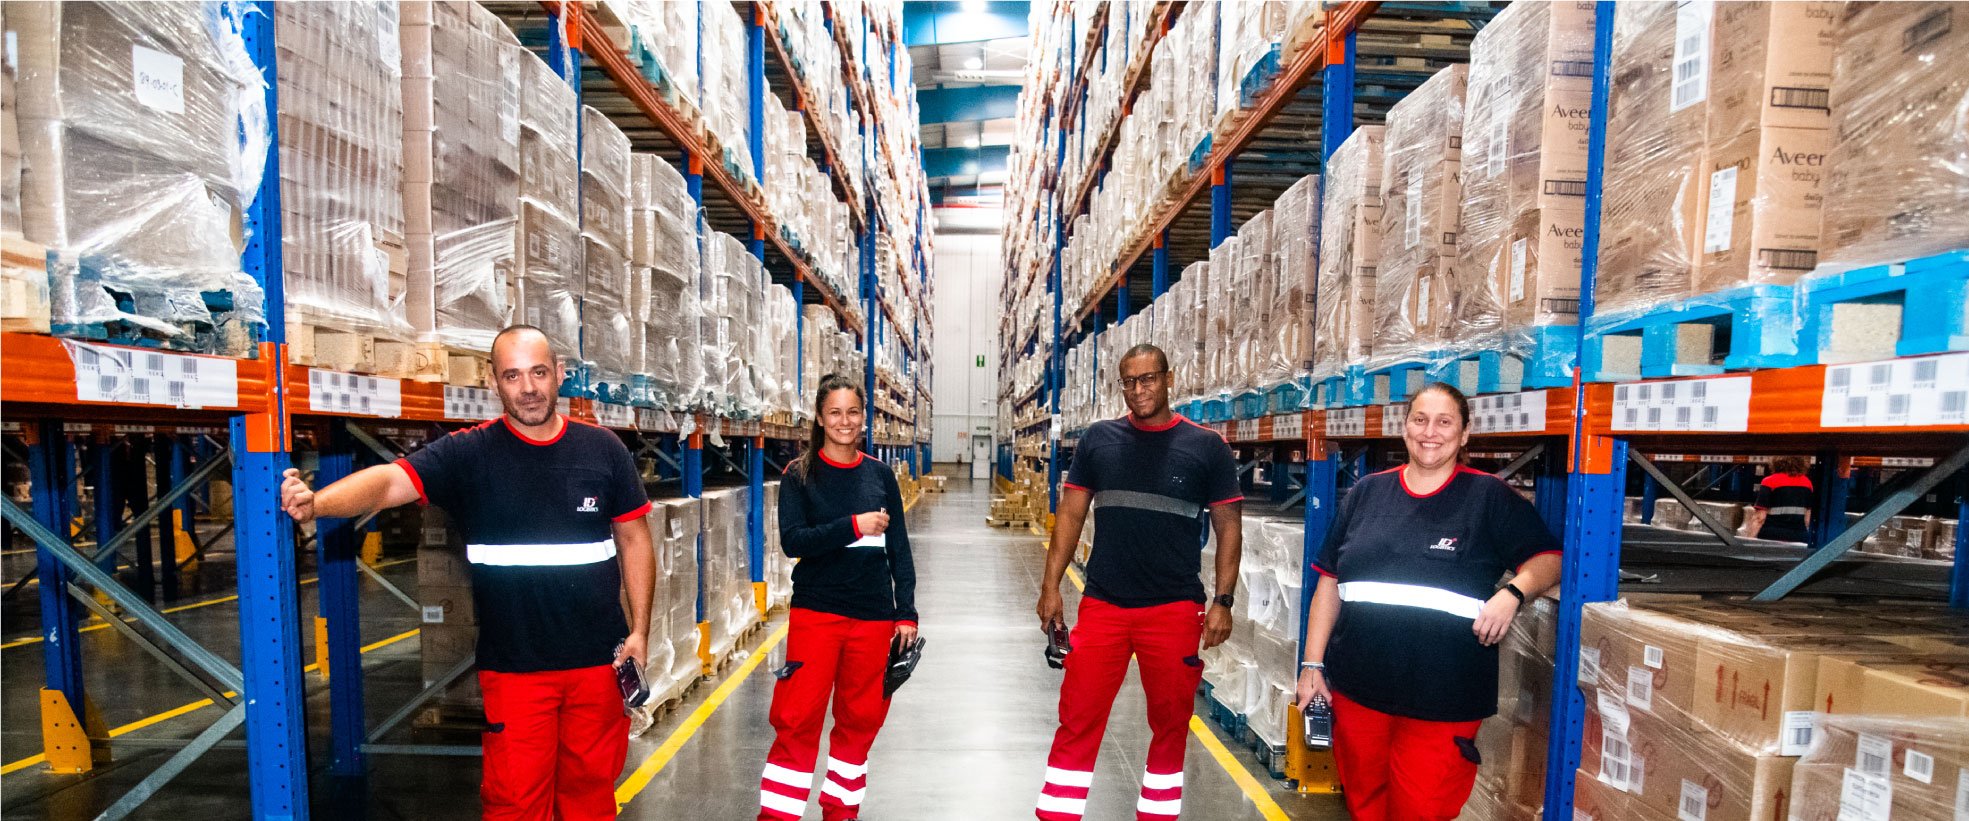 ID Logistics employees in a warehouse.